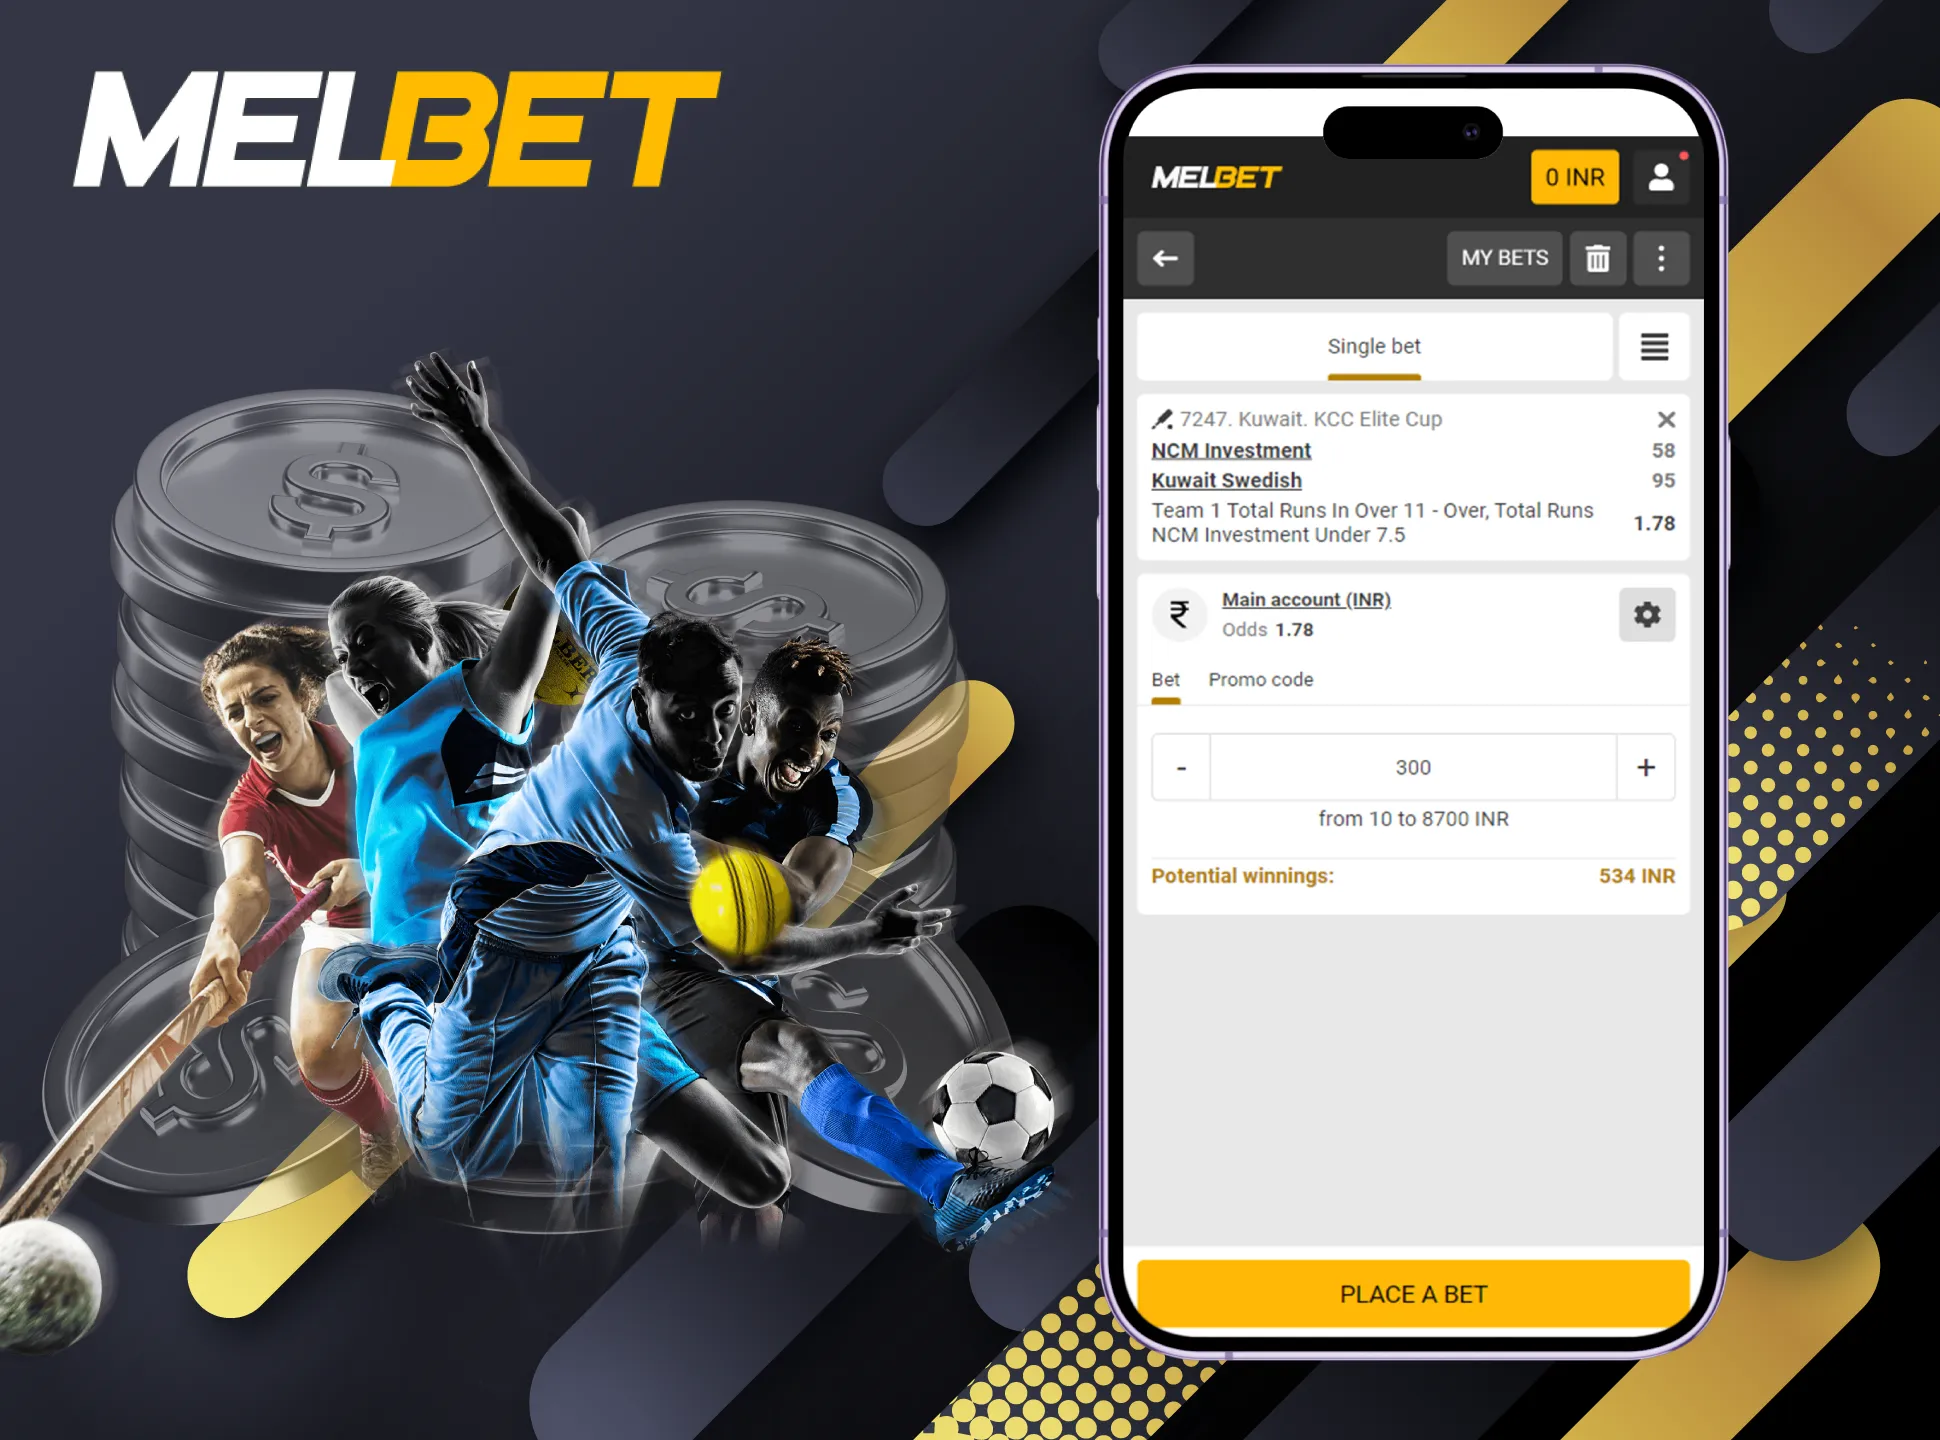 Choose the sport event and place a bet on its outcome.